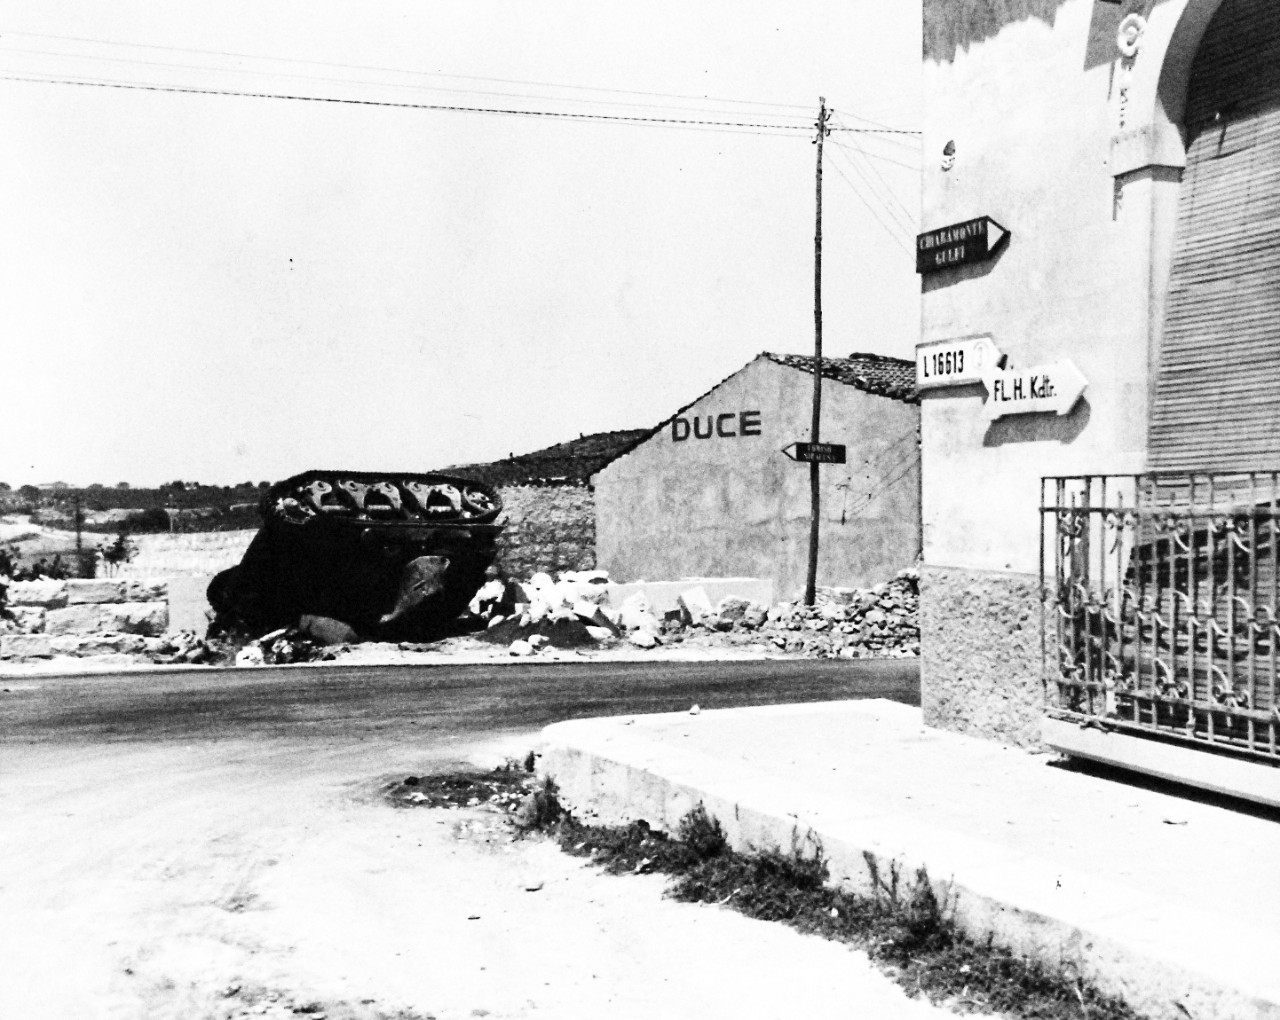 80-G-86219:  Operation Husky, July-August 1943.  Battle damage shown after successful landing operations by the Allies in the invasion of Sicily.  Note: Italian light tank destroyed by 105 M.M. gun at Comiso.     Photograph received July 14, 1943.      U.S. Navy Photograph, now in the collections of the National Archives.  (2017/01/17).